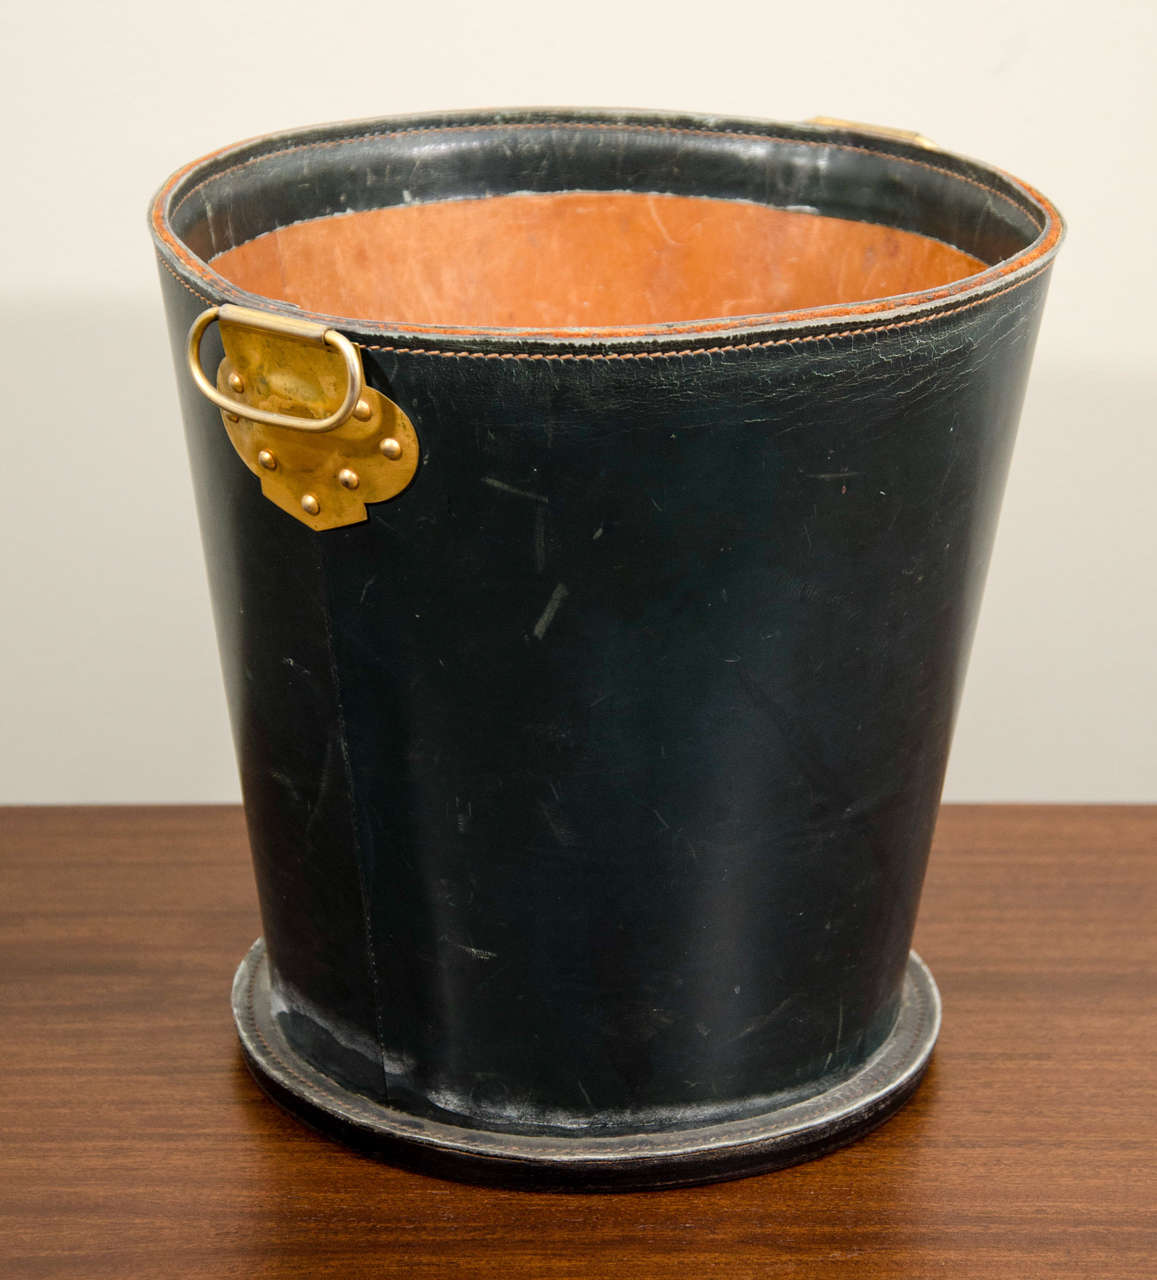 Elegant French leather waste paper basket with decorative brass handle.